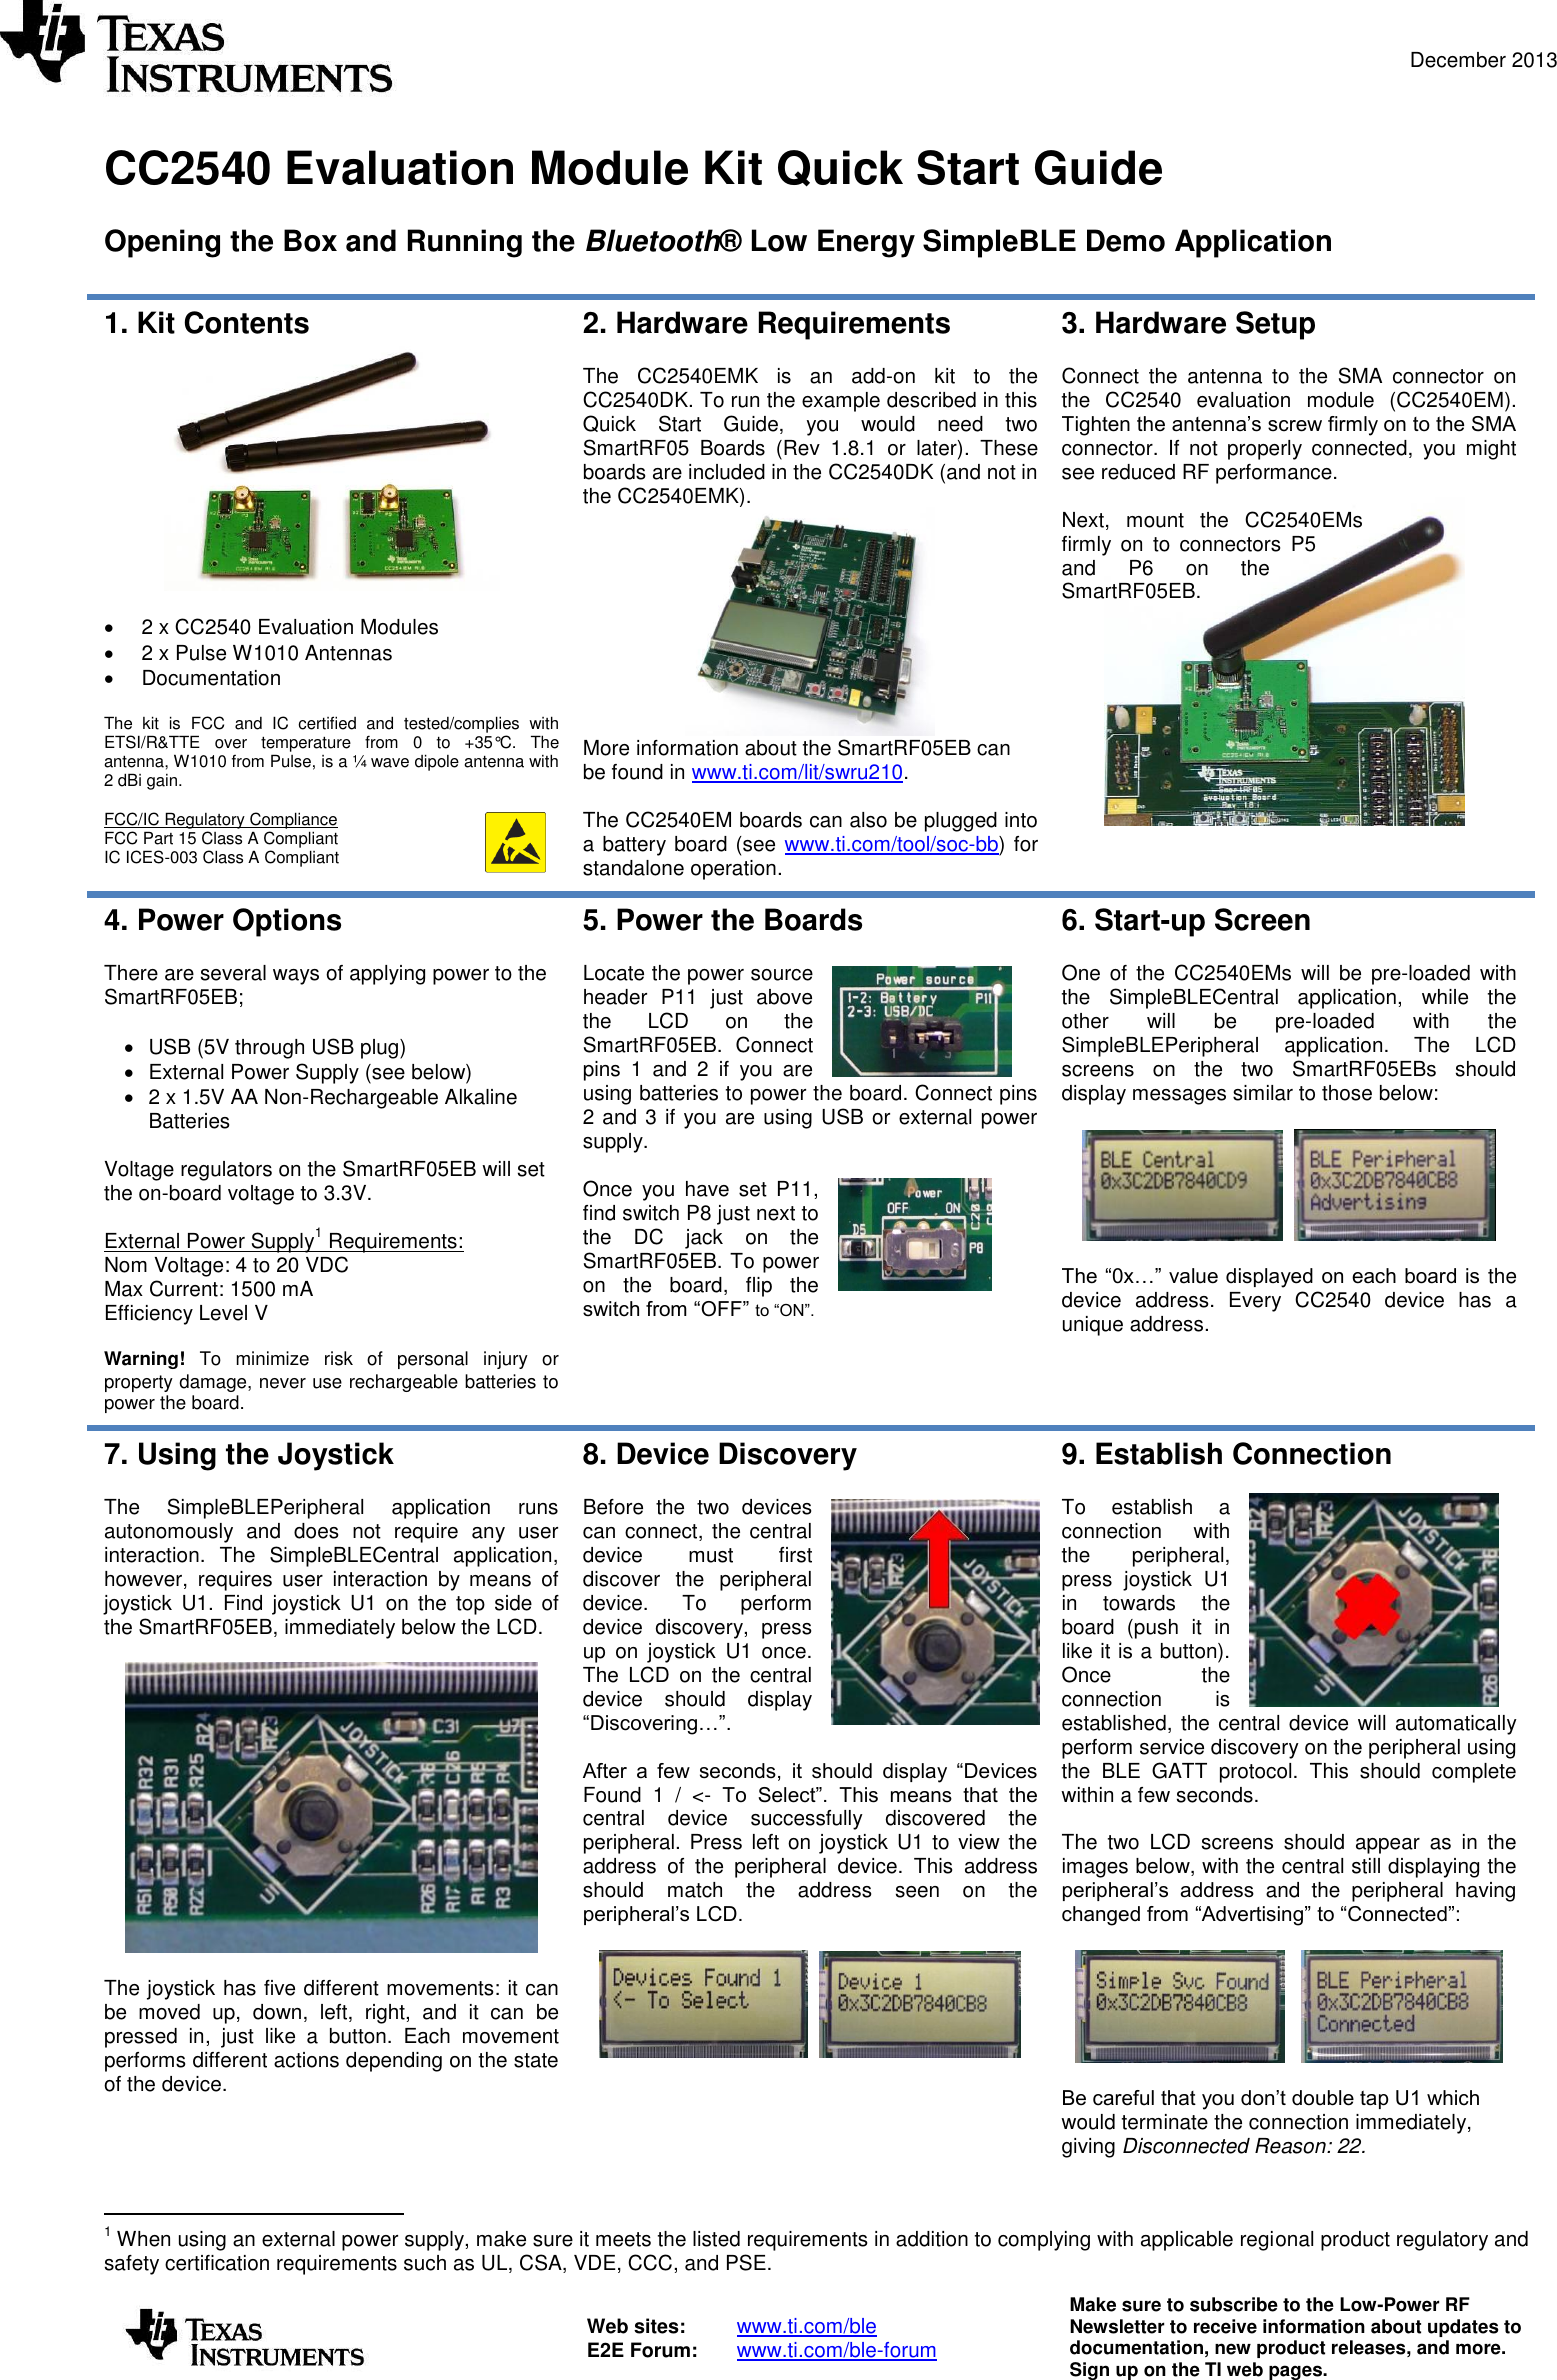  December 2013   Web sites:  www.ti.com/ble  E2E Forum:  www.ti.com/ble-forum Make sure to subscribe to the Low-Power RF Newsletter to receive information about updates to documentation, new product releases, and more. Sign up on the TI web pages.   CC2540 Evaluation Module Kit Quick Start Guide  Opening the Box and Running the Bluetooth® Low Energy SimpleBLE Demo Application  1. Kit Contents     2 x CC2540 Evaluation Modules   2 x Pulse W1010 Antennas    Documentation  The  kit  is  FCC  and  IC  certified  and  tested/complies  with ETSI/R&amp;TTE  over  temperature  from  0  to  +35°C.  The antenna, W1010 from Pulse, is a ¼ wave dipole antenna with 2 dBi gain.   FCC/IC Regulatory Compliance FCC Part 15 Class A Compliant IC ICES-003 Class A Compliant 2. Hardware Requirements  The  CC2540EMK  is  an  add-on  kit  to  the CC2540DK. To run the example described in this Quick  Start  Guide,  you  would  need  two SmartRF05  Boards  (Rev  1.8.1  or  later).  These boards are included in the CC2540DK (and not in the CC2540EMK).  More information about the SmartRF05EB can be found in www.ti.com/lit/swru210.   The CC2540EM boards can also be plugged into a battery board (see www.ti.com/tool/soc-bb) for standalone operation. 3. Hardware Setup  Connect  the  antenna  to  the  SMA  connector  on the  CC2540  evaluation  module  (CC2540EM). Tighten the antenna’s screw firmly on to the SMA connector.  If  not  properly  connected,  you  might see reduced RF performance.   Next,  mount  the  CC2540EMs firmly  on  to  connectors  P5 and  P6  on  the SmartRF05EB.      4. Power Options  There are several ways of applying power to the SmartRF05EB;    USB (5V through USB plug)   External Power Supply (see below)   2 x 1.5V AA Non-Rechargeable Alkaline Batteries  Voltage regulators on the SmartRF05EB will set the on-board voltage to 3.3V.  External Power Supply1 Requirements: Nom Voltage: 4 to 20 VDC Max Current: 1500 mA Efficiency Level V  Warning!  To  minimize  risk  of  personal  injury  or property damage, never use rechargeable batteries to power the board. 5. Power the Boards  Locate the power source header  P11  just  above the  LCD  on  the SmartRF05EB.  Connect pins  1  and  2  if  you  are using batteries to power the board. Connect pins 2 and 3 if you are using USB or external power supply.  Once  you  have  set  P11, find switch P8 just next to the  DC  jack  on  the SmartRF05EB. To power on  the  board,  flip  the switch from “OFF” to “ON”.  6. Start-up Screen  One  of  the CC2540EMs  will be  pre-loaded  with the  SimpleBLECentral  application,  while  the other  will  be  pre-loaded  with  the SimpleBLEPeripheral  application.  The  LCD screens  on  the  two  SmartRF05EBs  should display messages similar to those below:       The “0x…” value displayed on each board is  the device  address.  Every  CC2540  device  has a unique address. 7. Using the Joystick  The  SimpleBLEPeripheral  application  runs autonomously  and  does  not  require  any  user interaction.  The  SimpleBLECentral  application, however,  requires  user  interaction  by  means  of joystick  U1.  Find  joystick  U1  on  the  top  side  of the SmartRF05EB, immediately below the LCD.    The joystick has five different movements: it can be  moved  up,  down,  left,  right,  and  it  can  be pressed  in,  just  like  a  button.  Each  movement performs different actions depending on the state of the device.  8. Device Discovery  Before  the  two  devices can connect, the central device  must  first discover  the  peripheral device.  To  perform device  discovery,  press up  on  joystick  U1  once. The  LCD  on  the  central device  should  display “Discovering…”.   After  a  few  seconds,  it  should  display  “Devices Found  1  /  &lt;-  To  Select”.  This  means  that  the central  device  successfully  discovered  the peripheral. Press left on joystick U1 to view  the address  of  the  peripheral  device.  This  address should  match  the  address  seen  on  the peripheral’s LCD.      9. Establish Connection  To  establish  a connection  with the  peripheral, press  joystick  U1 in  towards  the board  (push  it  in like it is a button). Once  the connection  is established, the central device will automatically perform service discovery on the peripheral using the  BLE  GATT  protocol.  This  should  complete within a few seconds.  The  two  LCD  screens  should  appear  as  in  the images below, with the central still displaying the peripheral’s  address  and  the  peripheral  having changed from “Advertising” to “Connected”:        Be careful that you don’t double tap U1 which would terminate the connection immediately, giving Disconnected Reason: 22.                                       1 When using an external power supply, make sure it meets the listed requirements in addition to complying with applicable regional product regulatory and safety certification requirements such as UL, CSA, VDE, CCC, and PSE. 